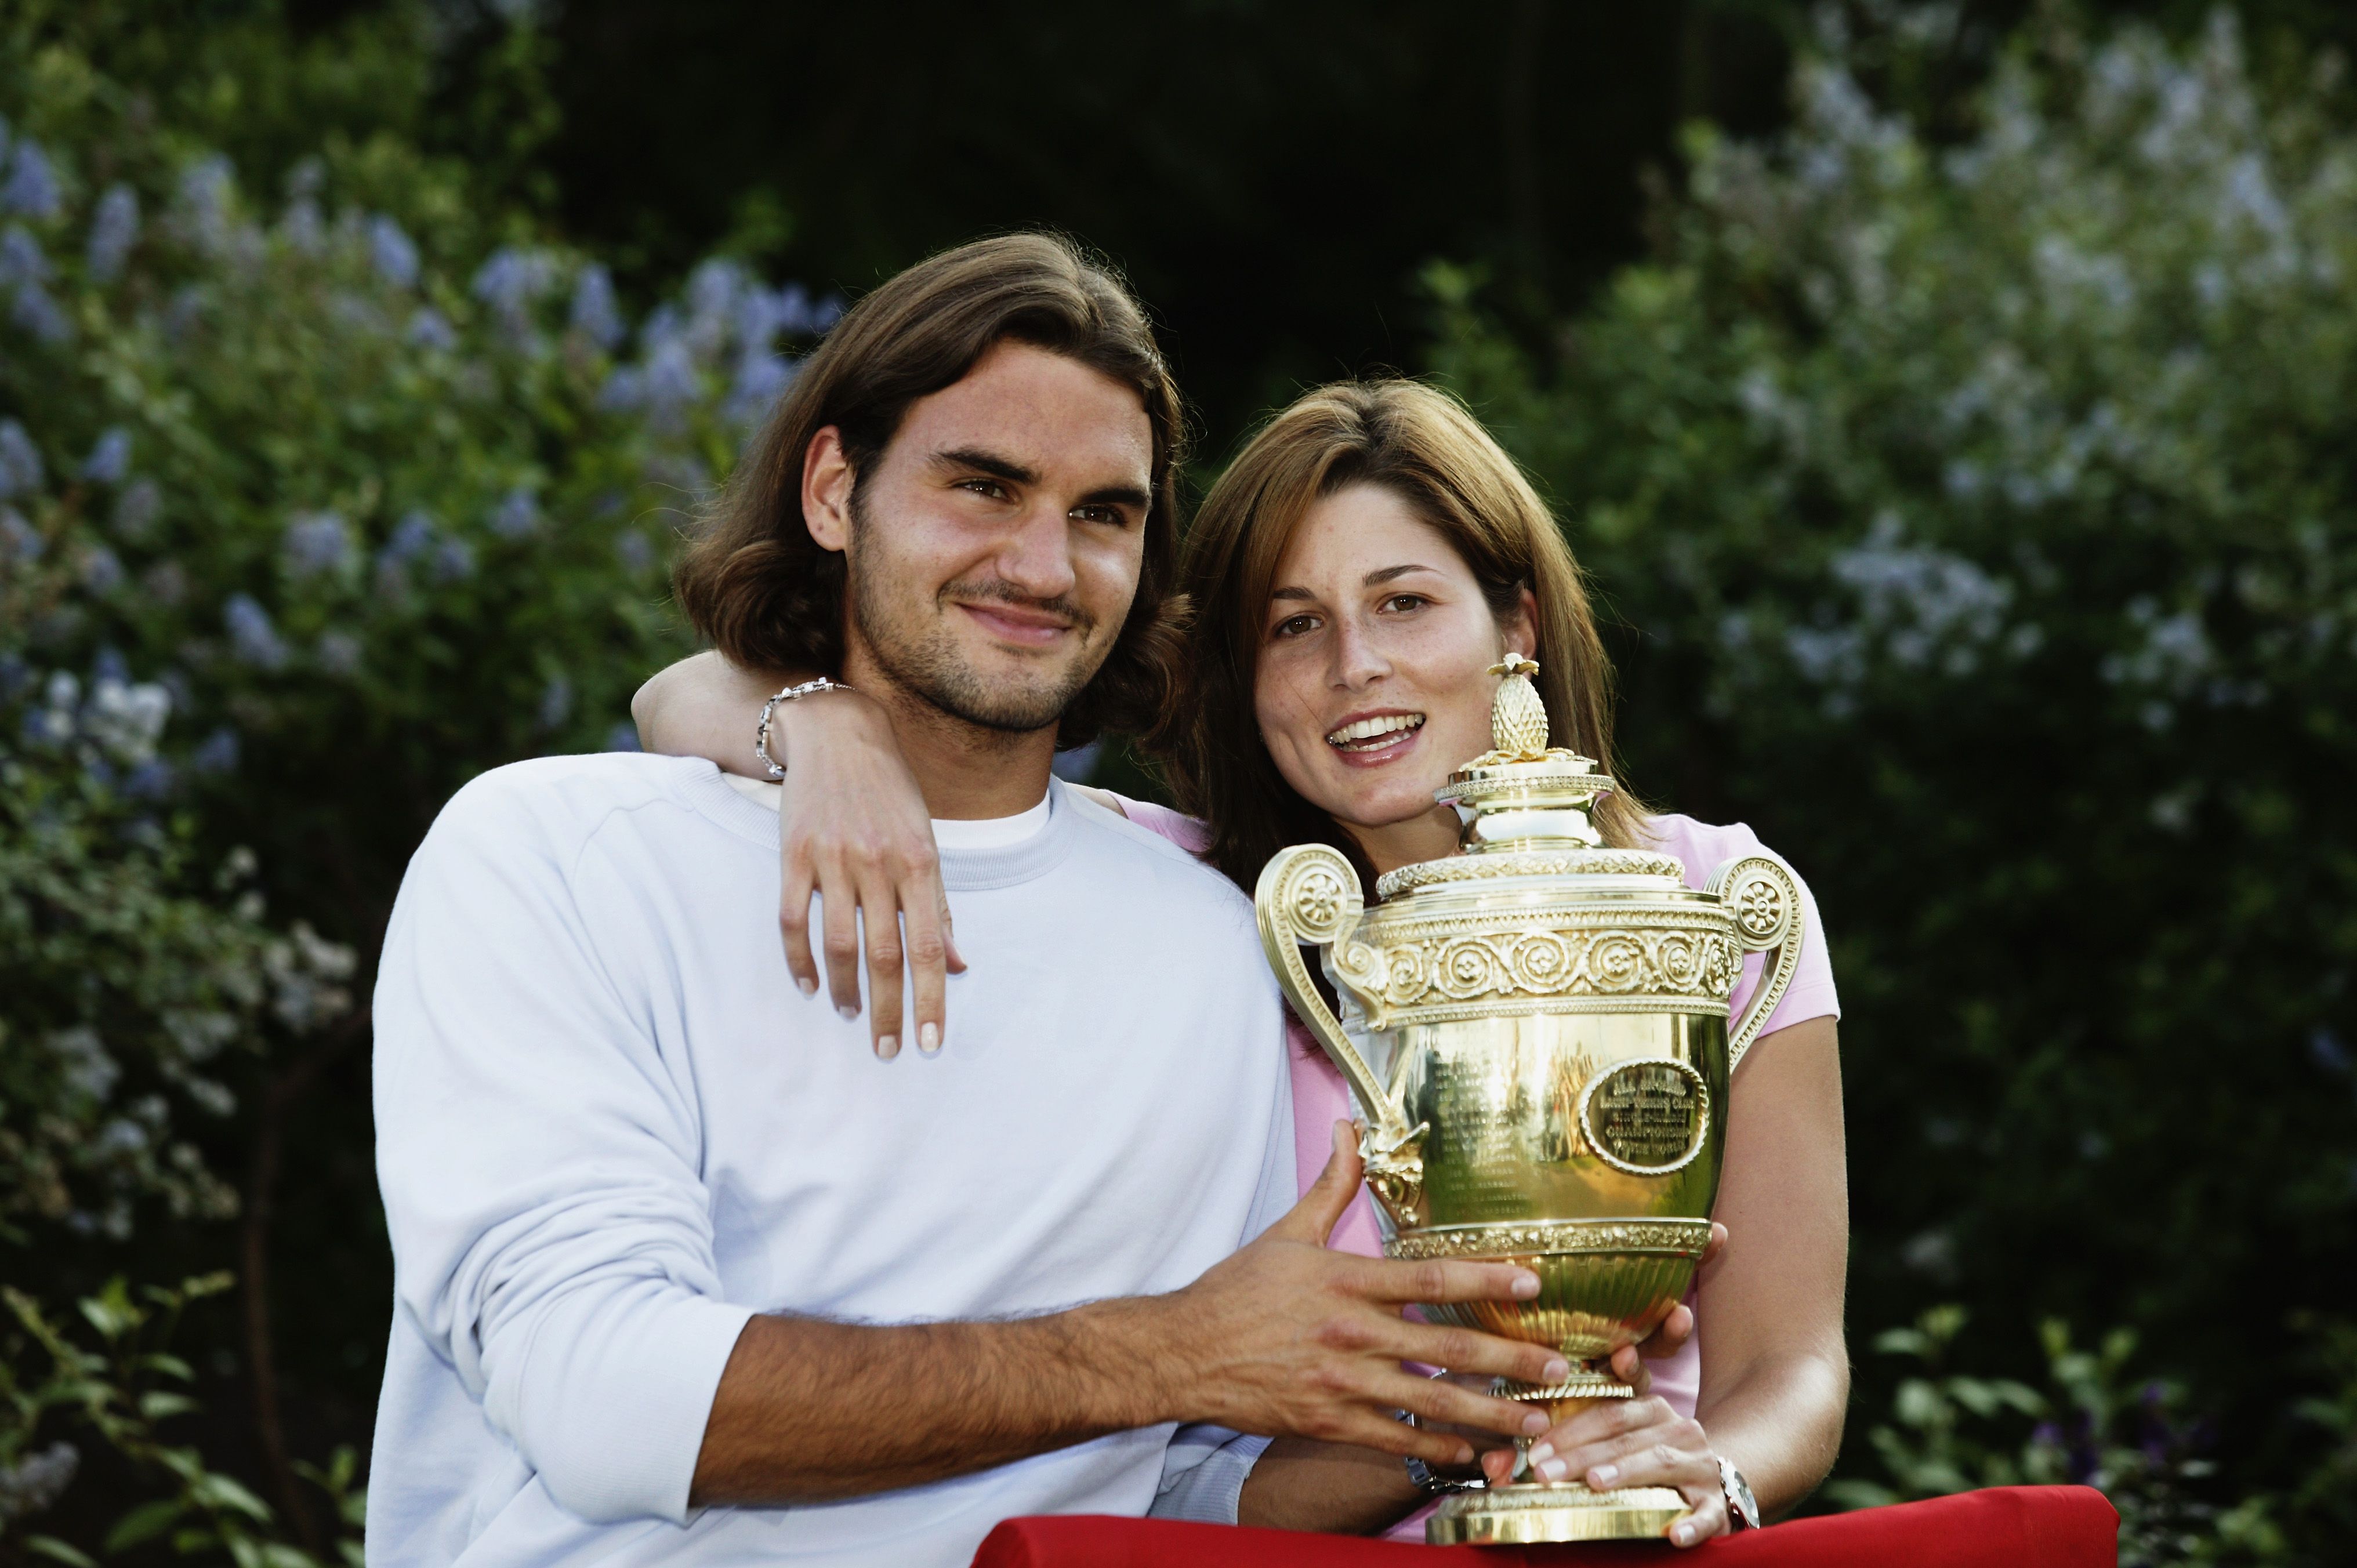 Mirka Federer Is Roger Federer S Wife And Mother Of Their 4 Kids Inside The Tennis Star S Family